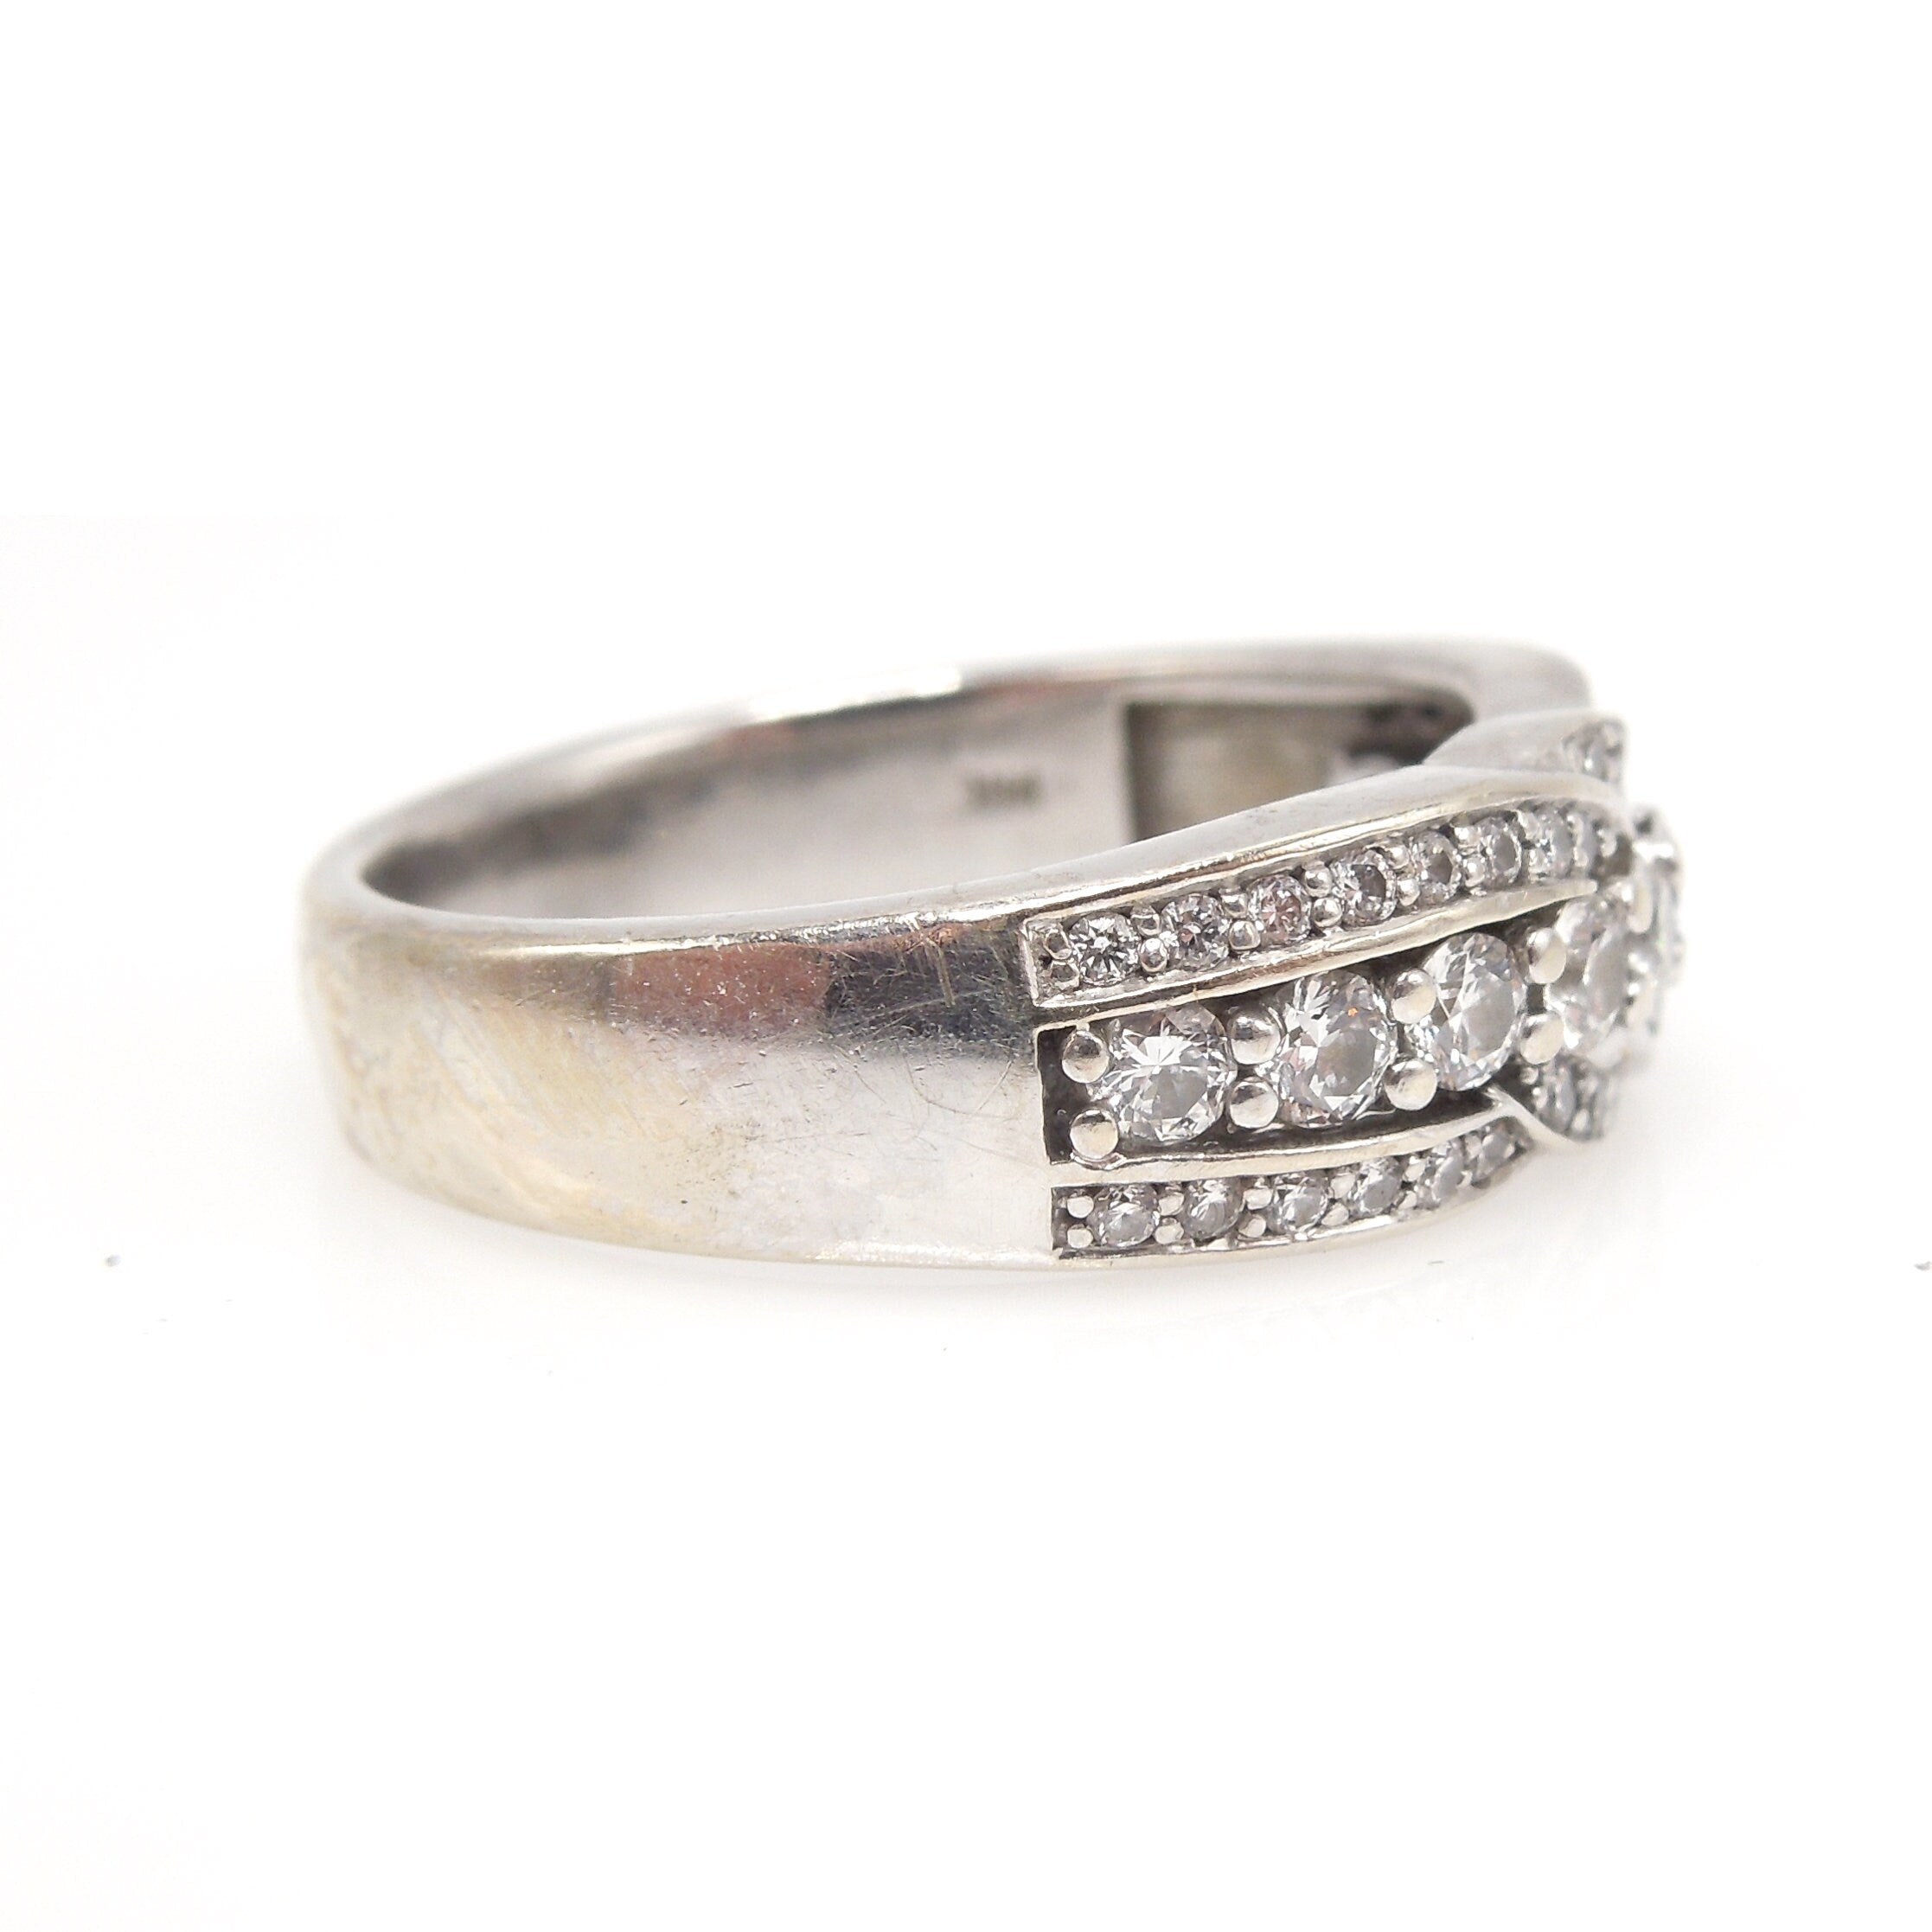 Vintage Carved Diamond and 14K White Gold Three Row Crossover Engagement Ring or Wedding Band